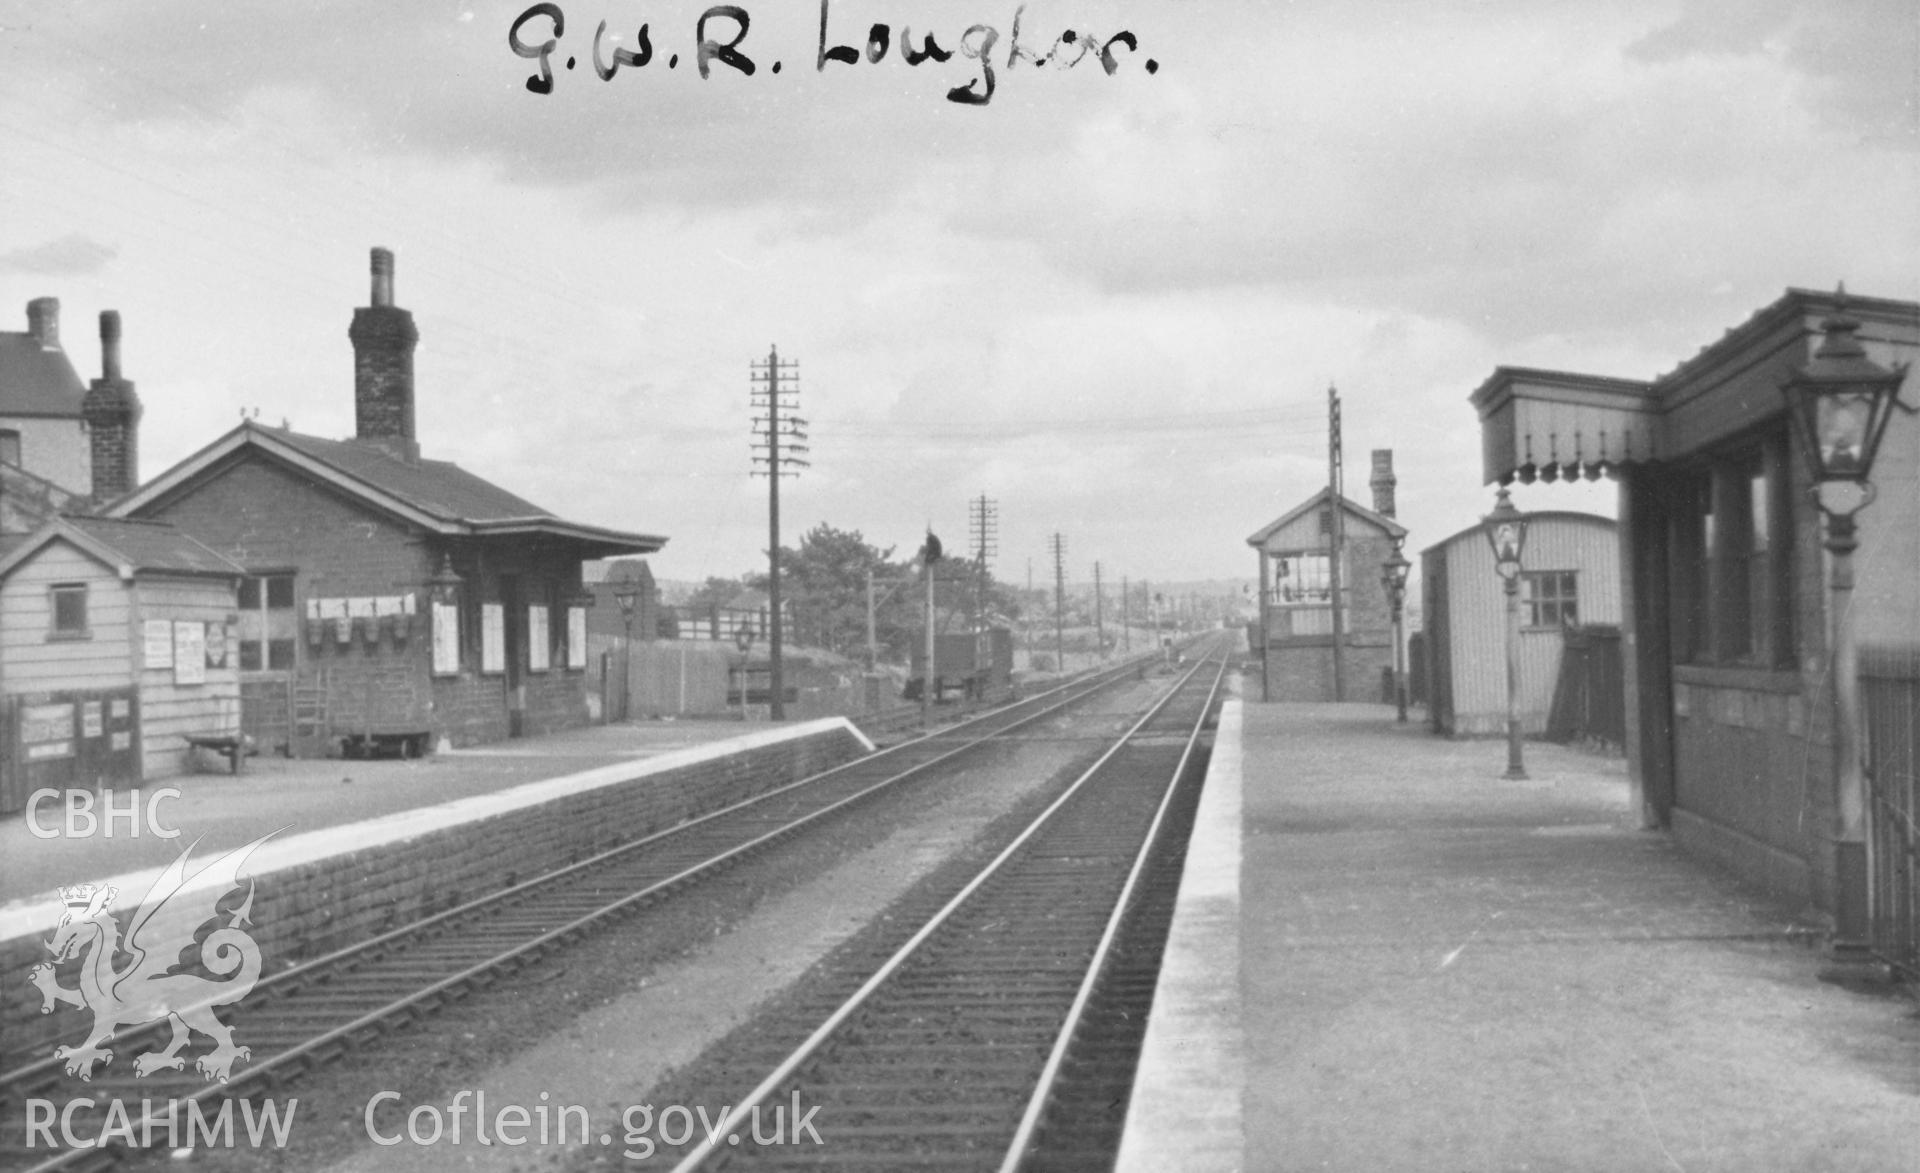 Black and white postcard showing general view of Loughor Railway Station, from the Rokeby Collection Album Vol VI pt3 105a.